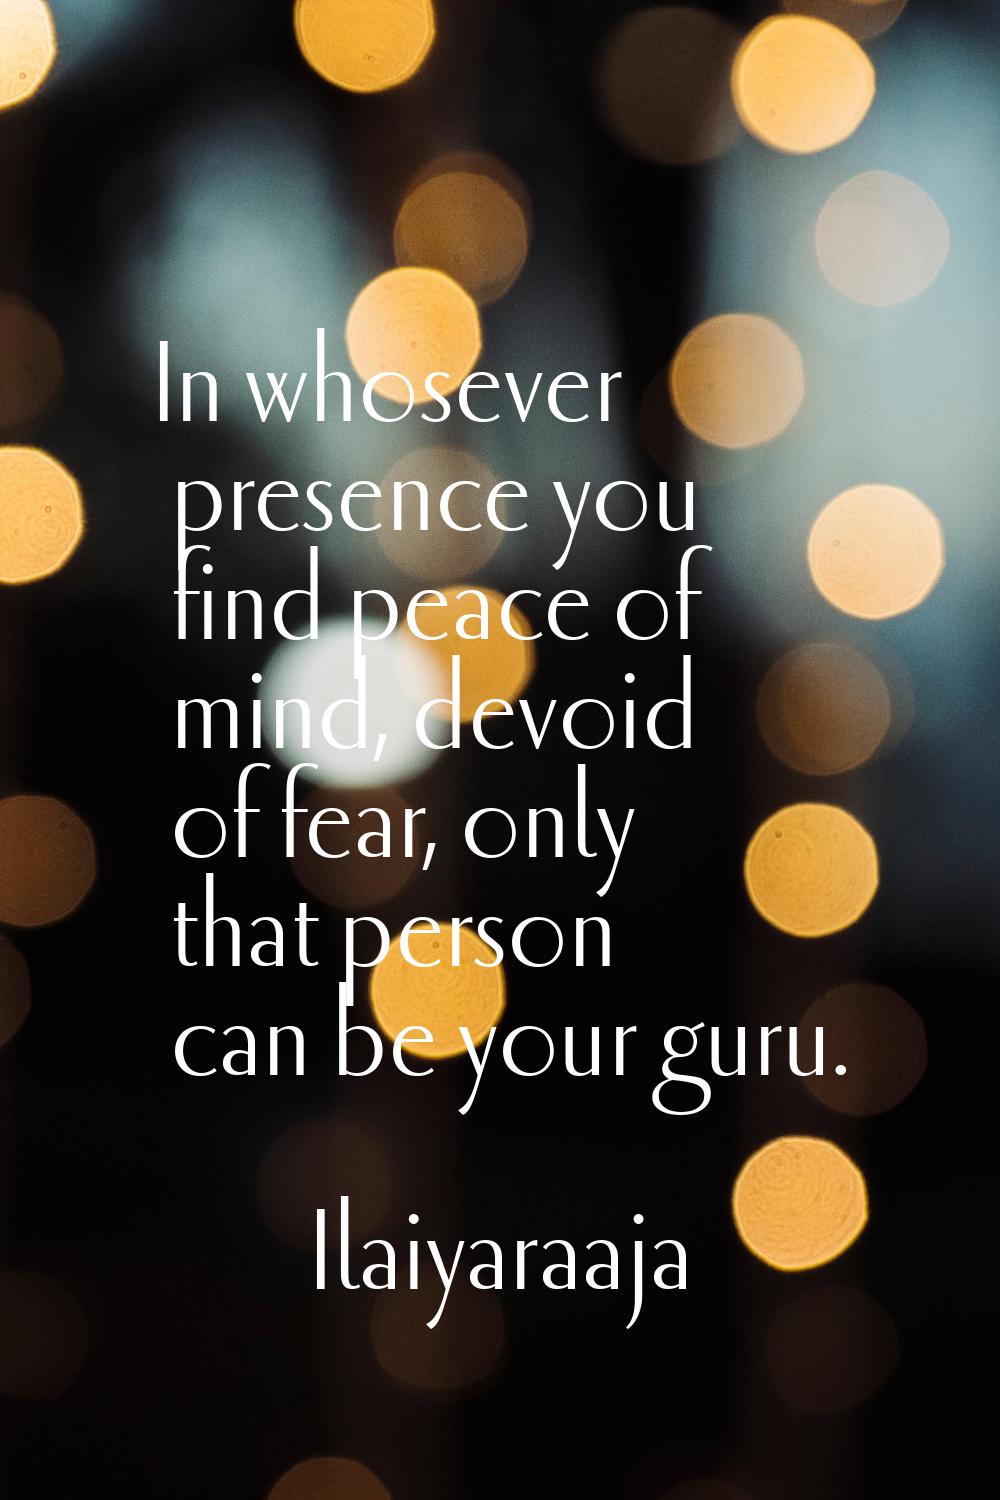 In whosever presence you find peace of mind, devoid of fear, only that person can be your guru.